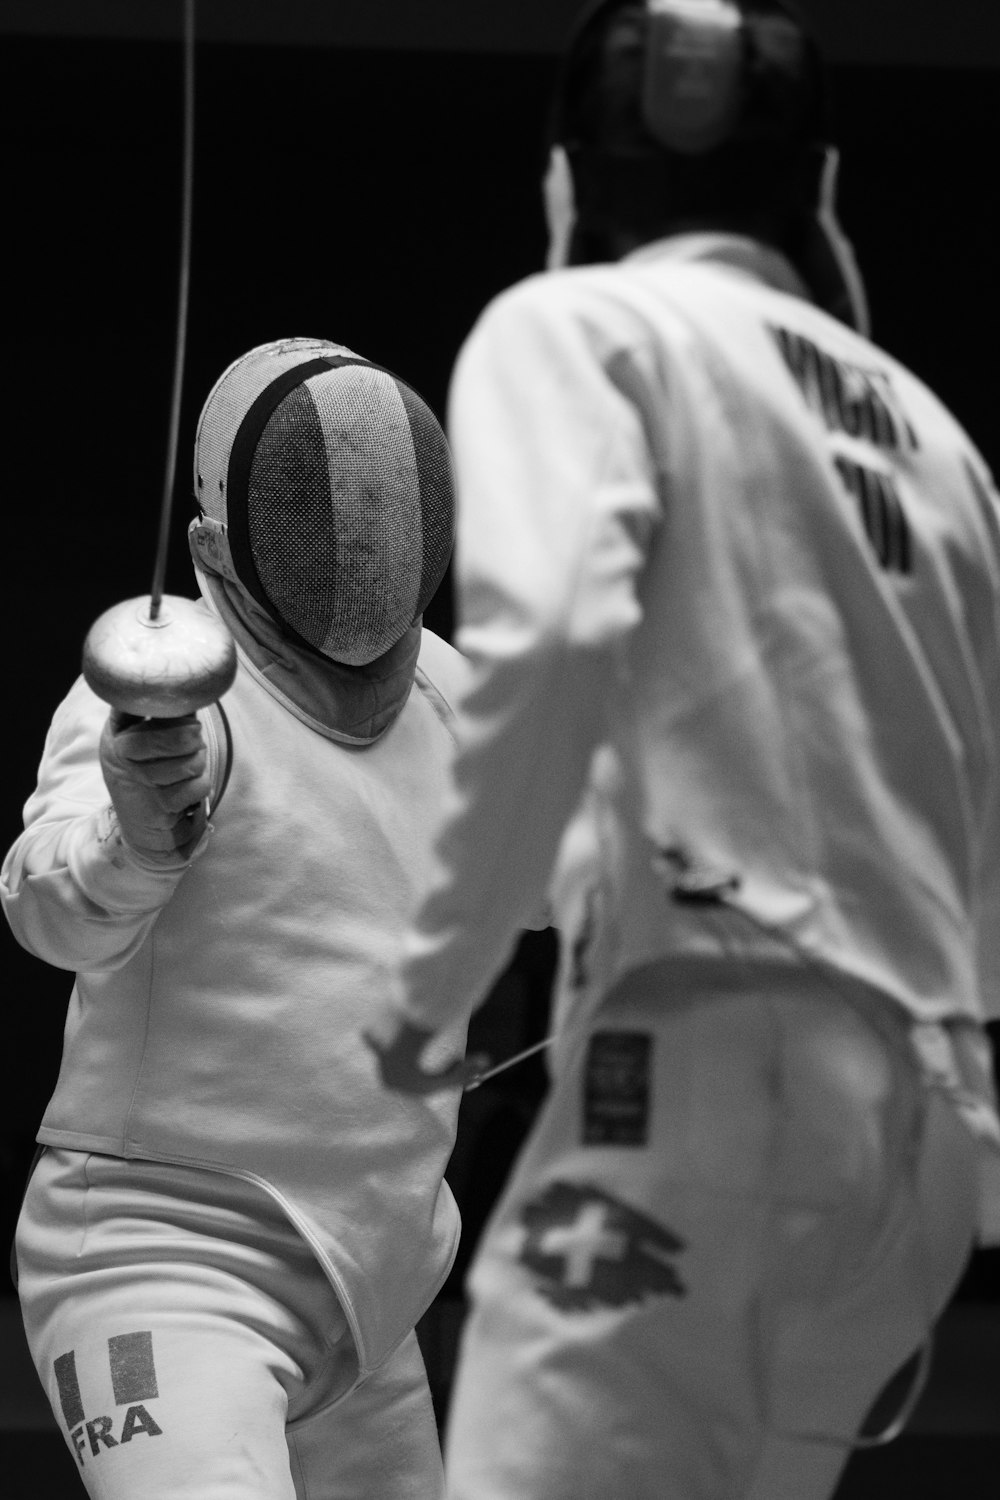 two men in fencing gear practicing their moves